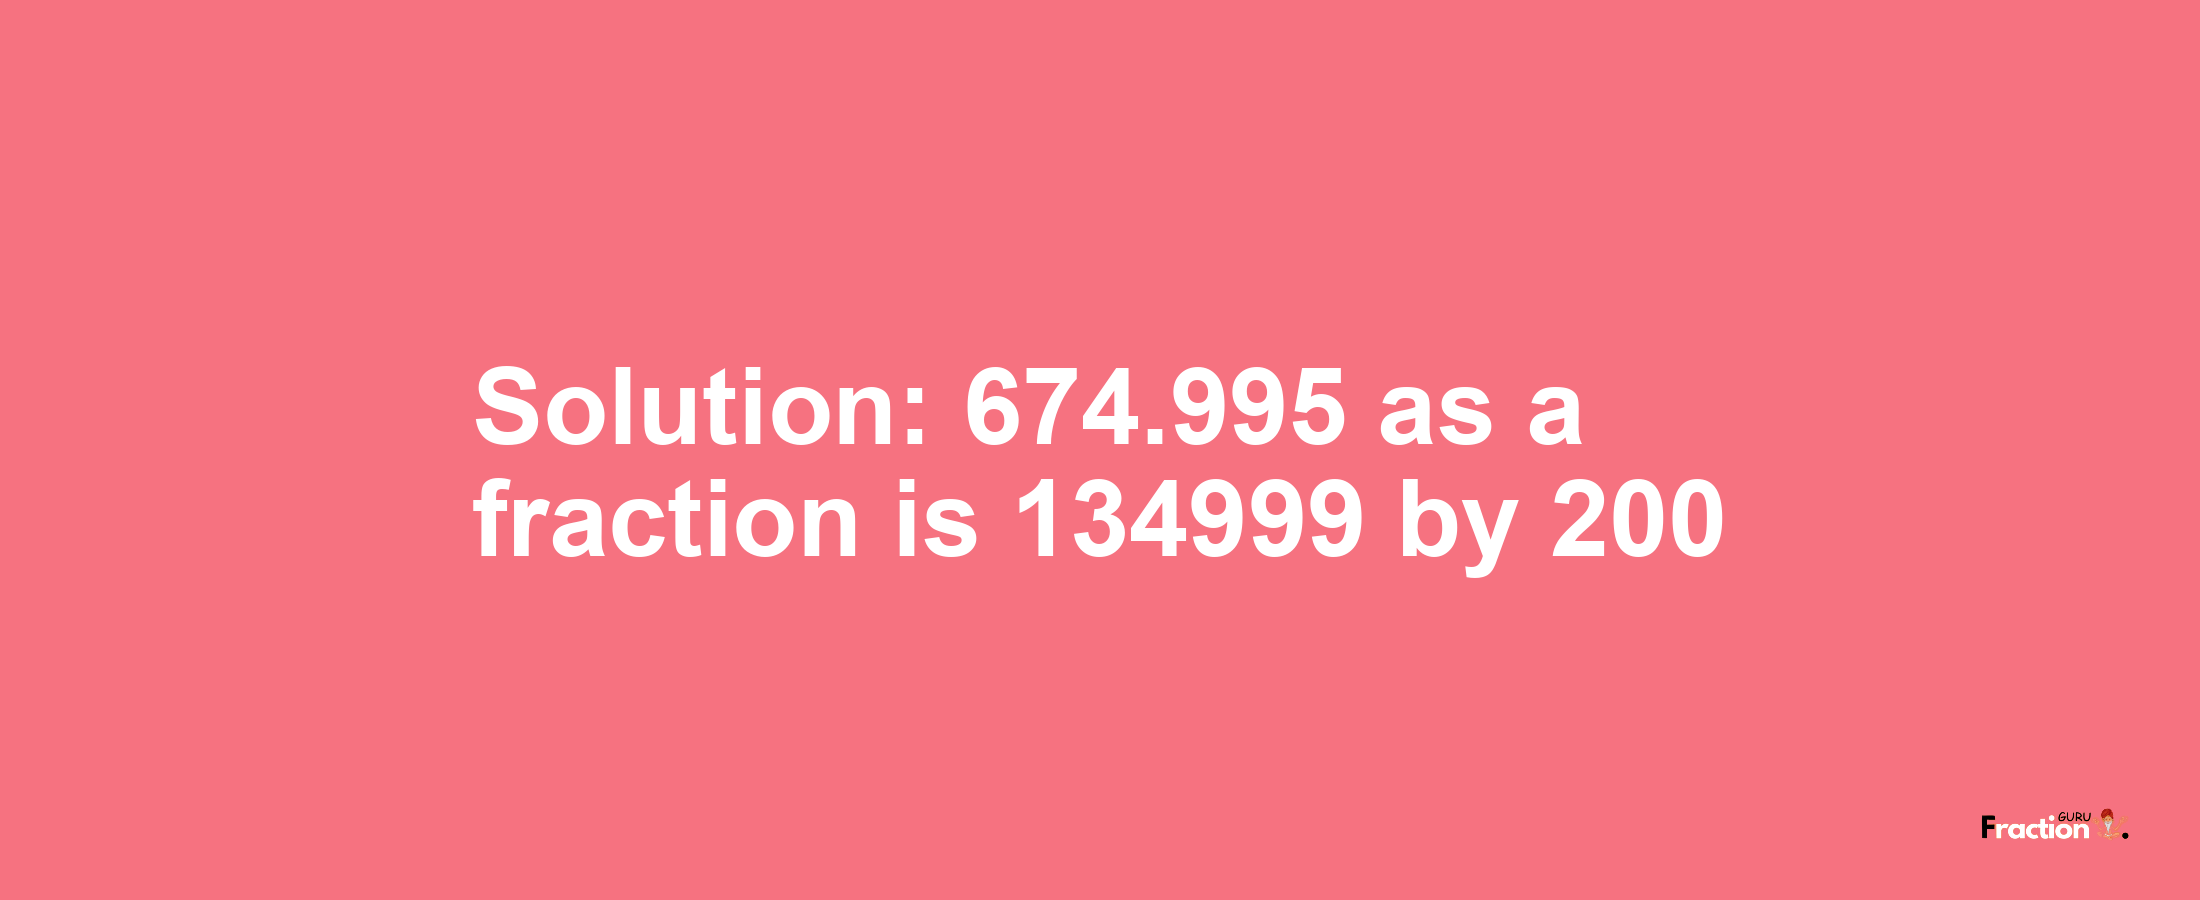 Solution:674.995 as a fraction is 134999/200